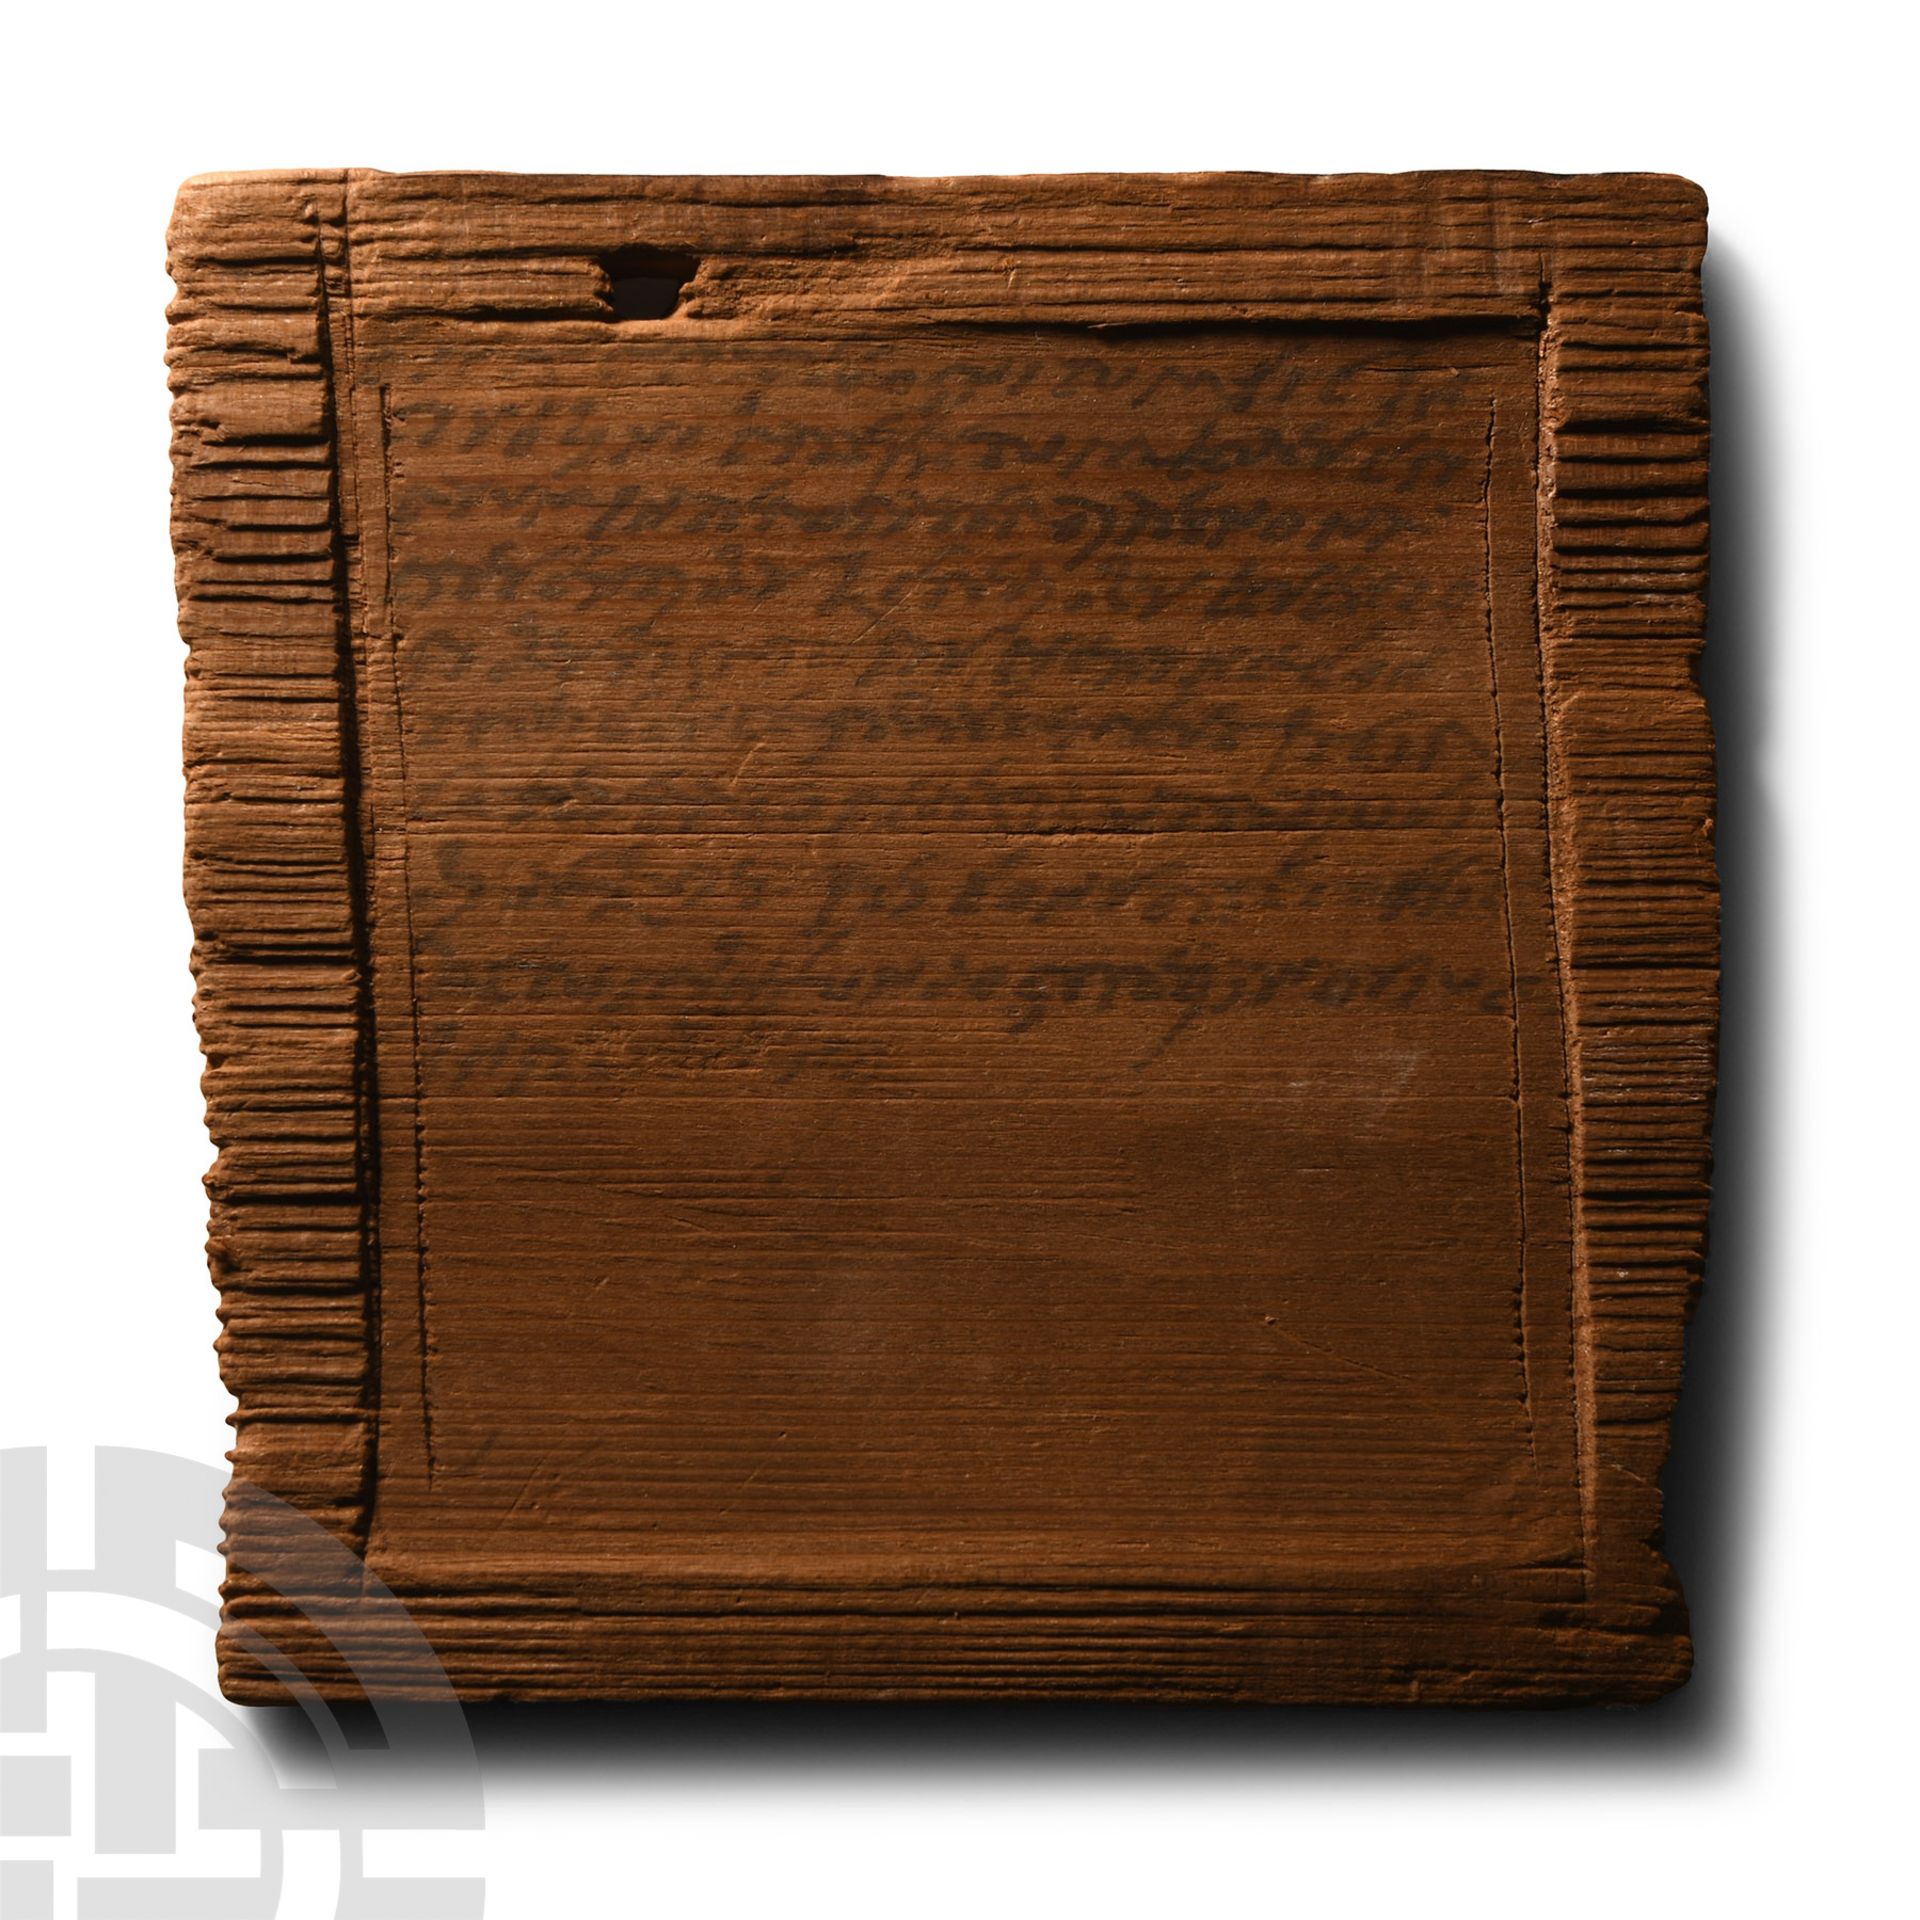 Roman Inked Wooden Tablet, a Legal Document from the Rascotiano Estate